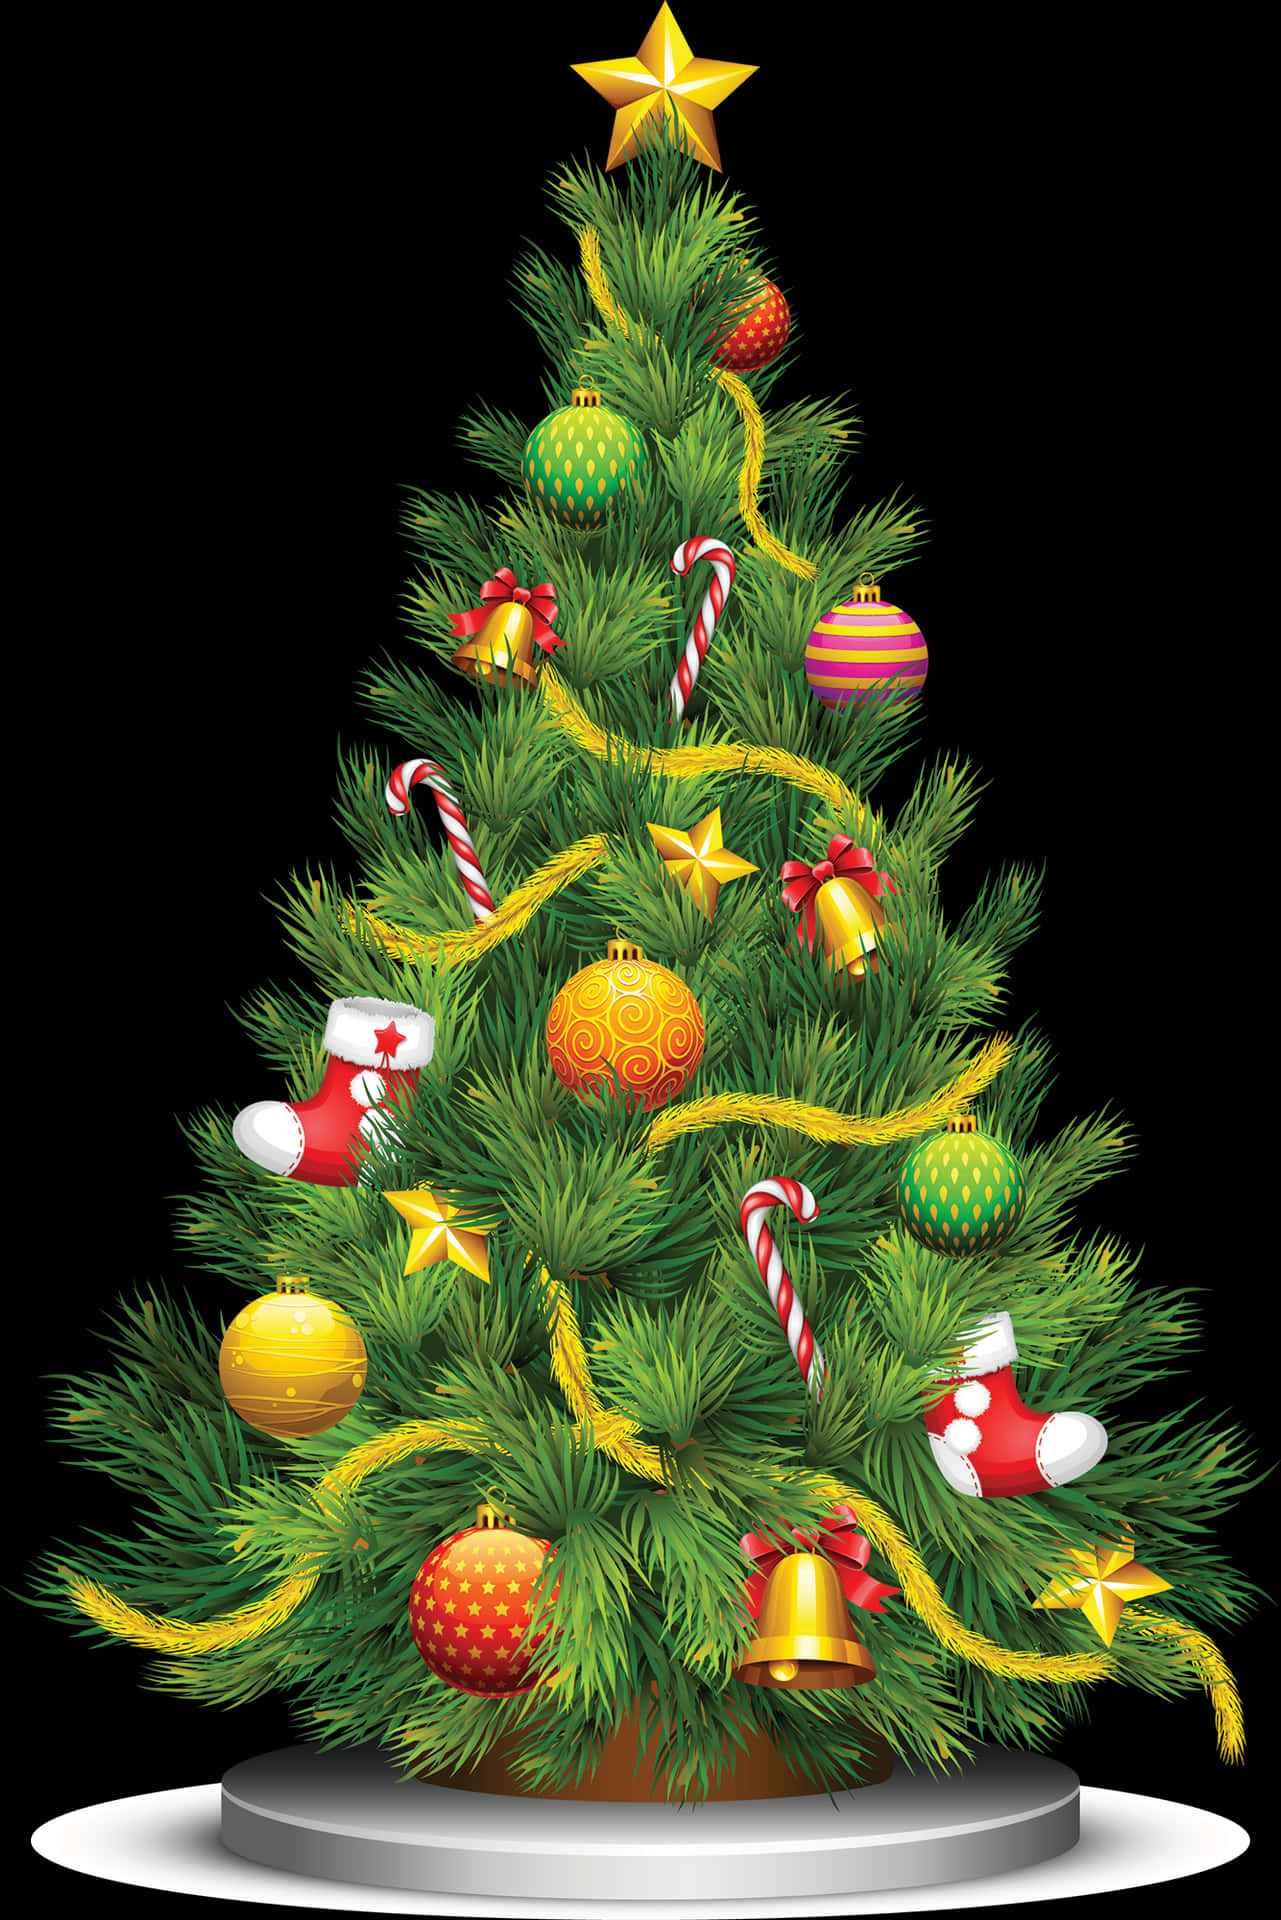 Decorated Christmas Tree Illustration.jpg PNG